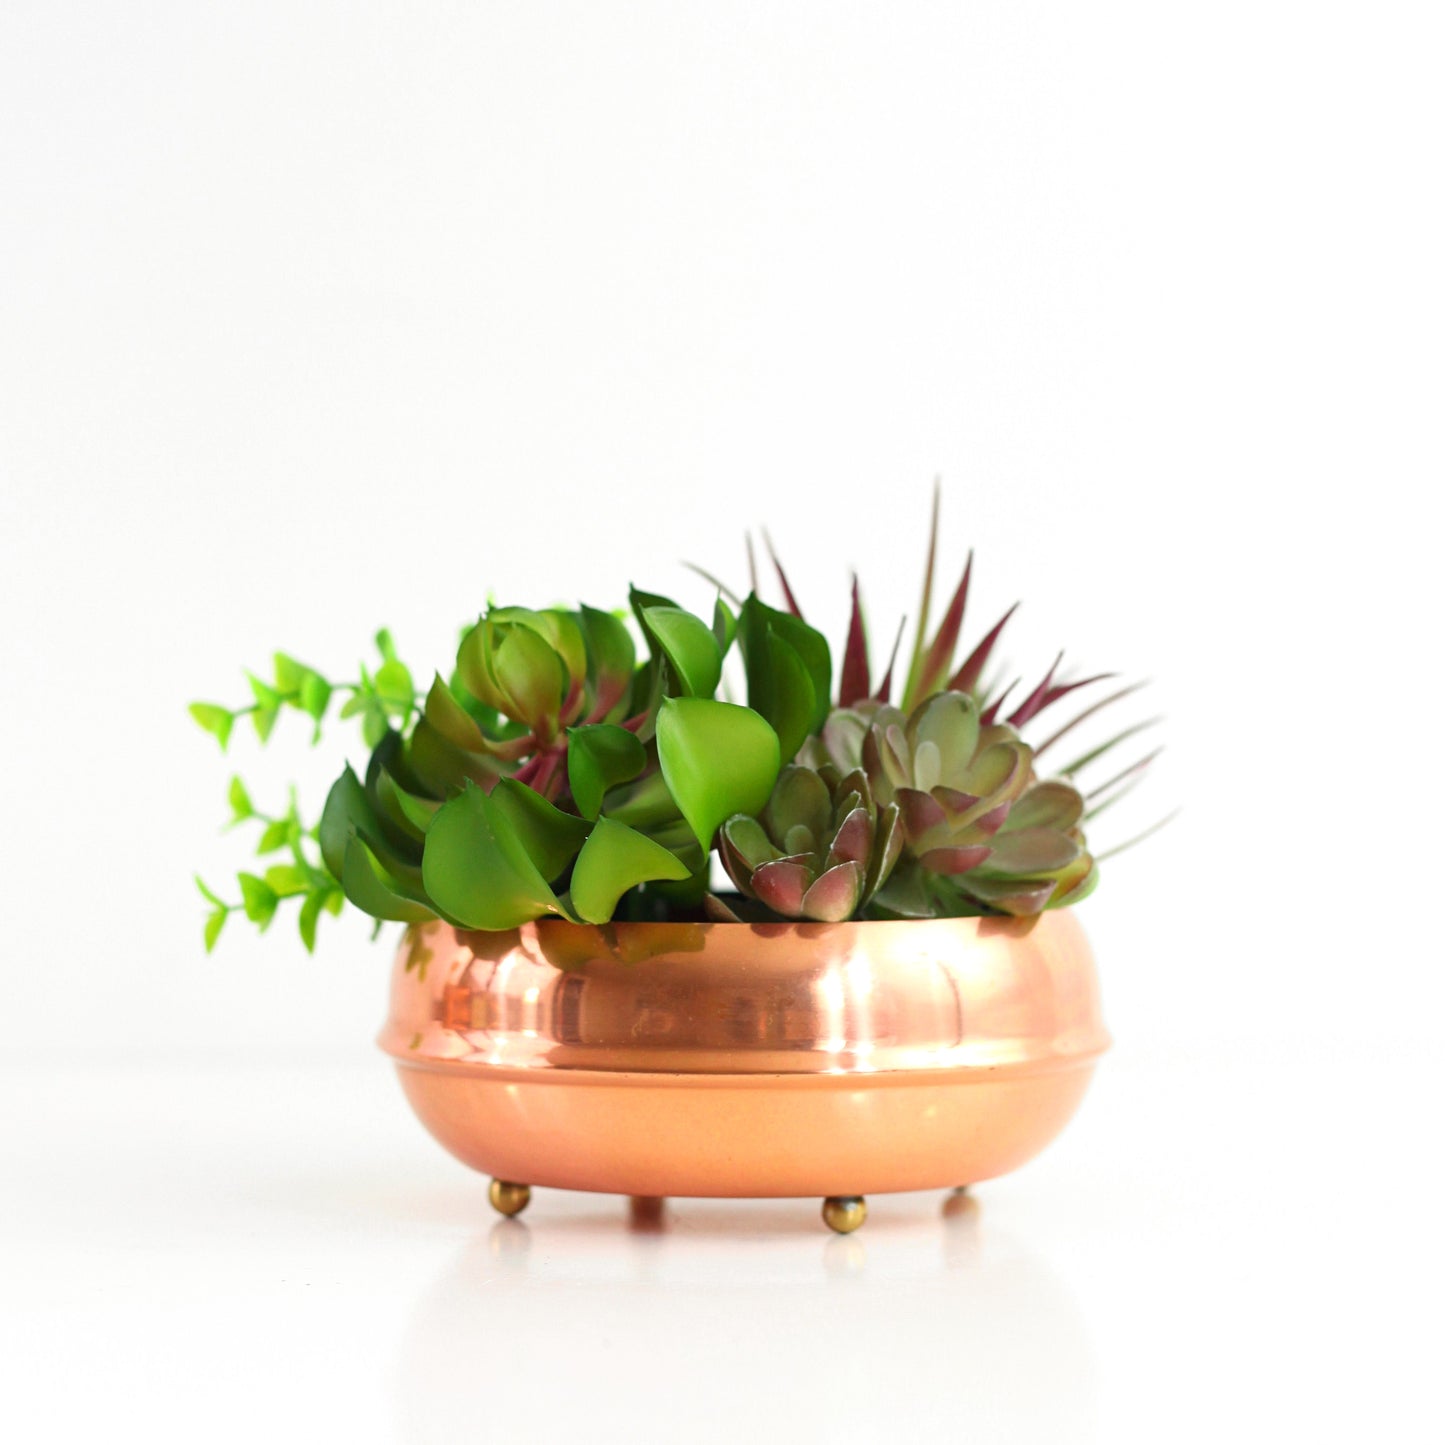 SOLD - Vintage Footed Copper Bowl by Coppercraft Guild